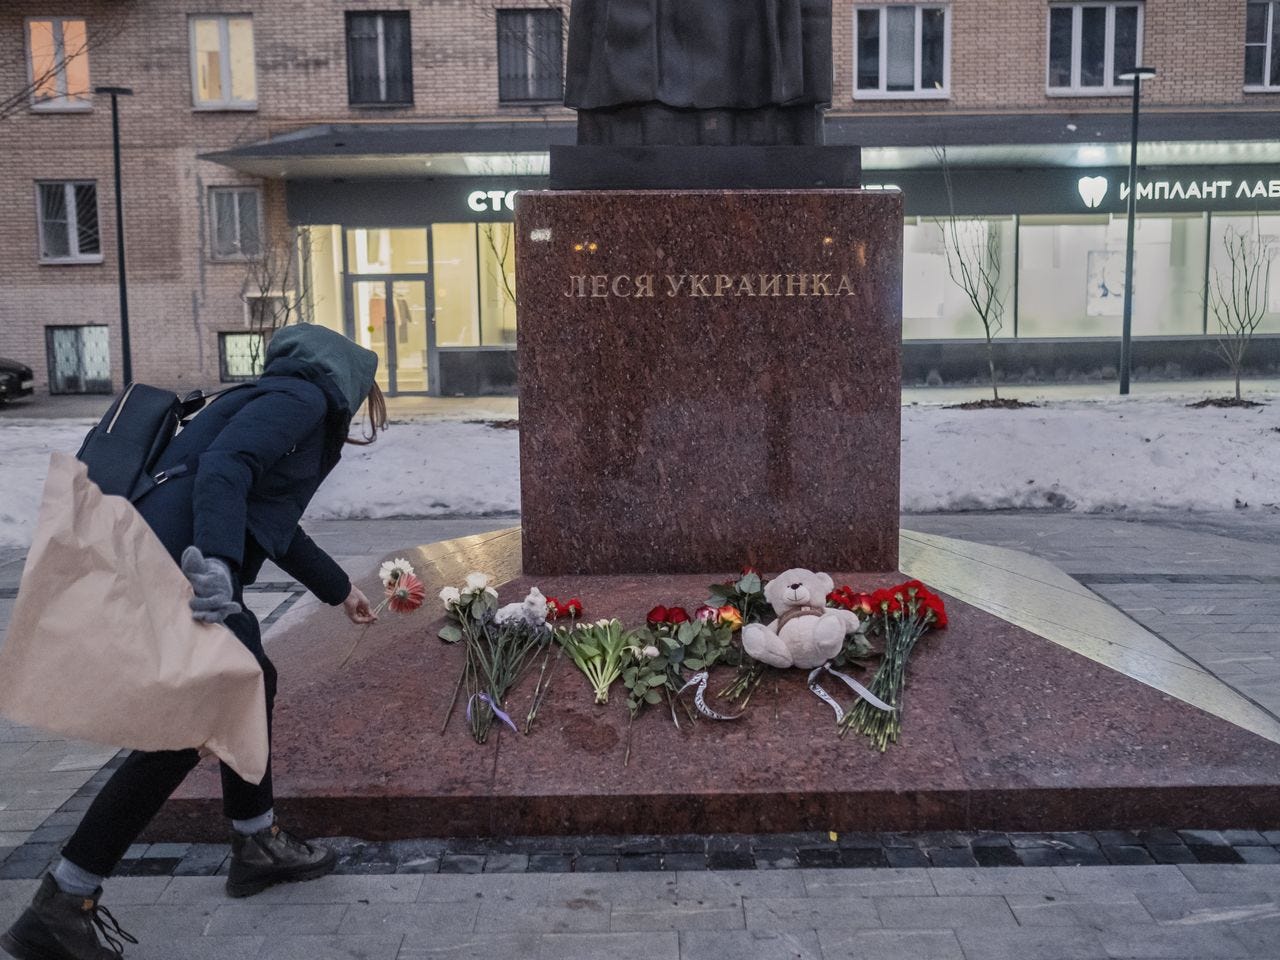 Russians Mourn Ukrainians Killed in War at Statue to a Ukrainian Poet in  Moscow - WSJ